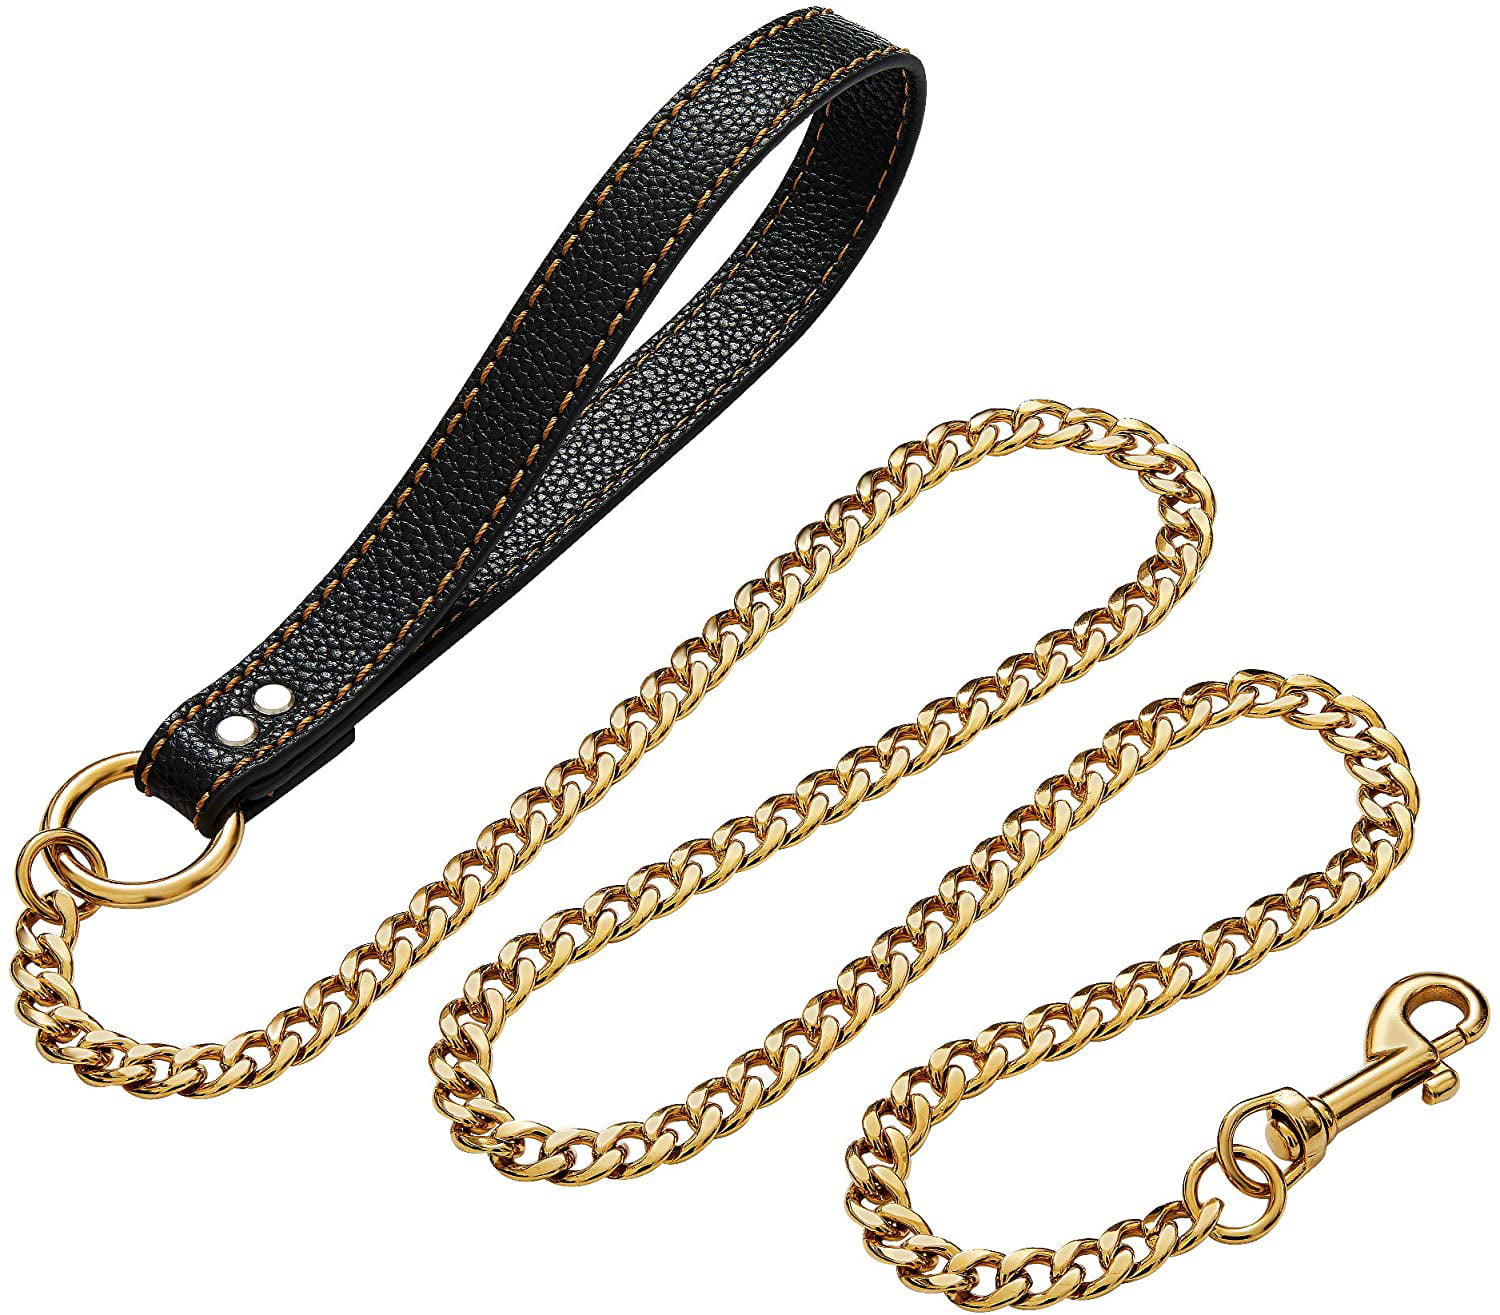 Stainless Steel Gold Chain Curban Dog Leash Lead Leather Handle 10mm 51" long 